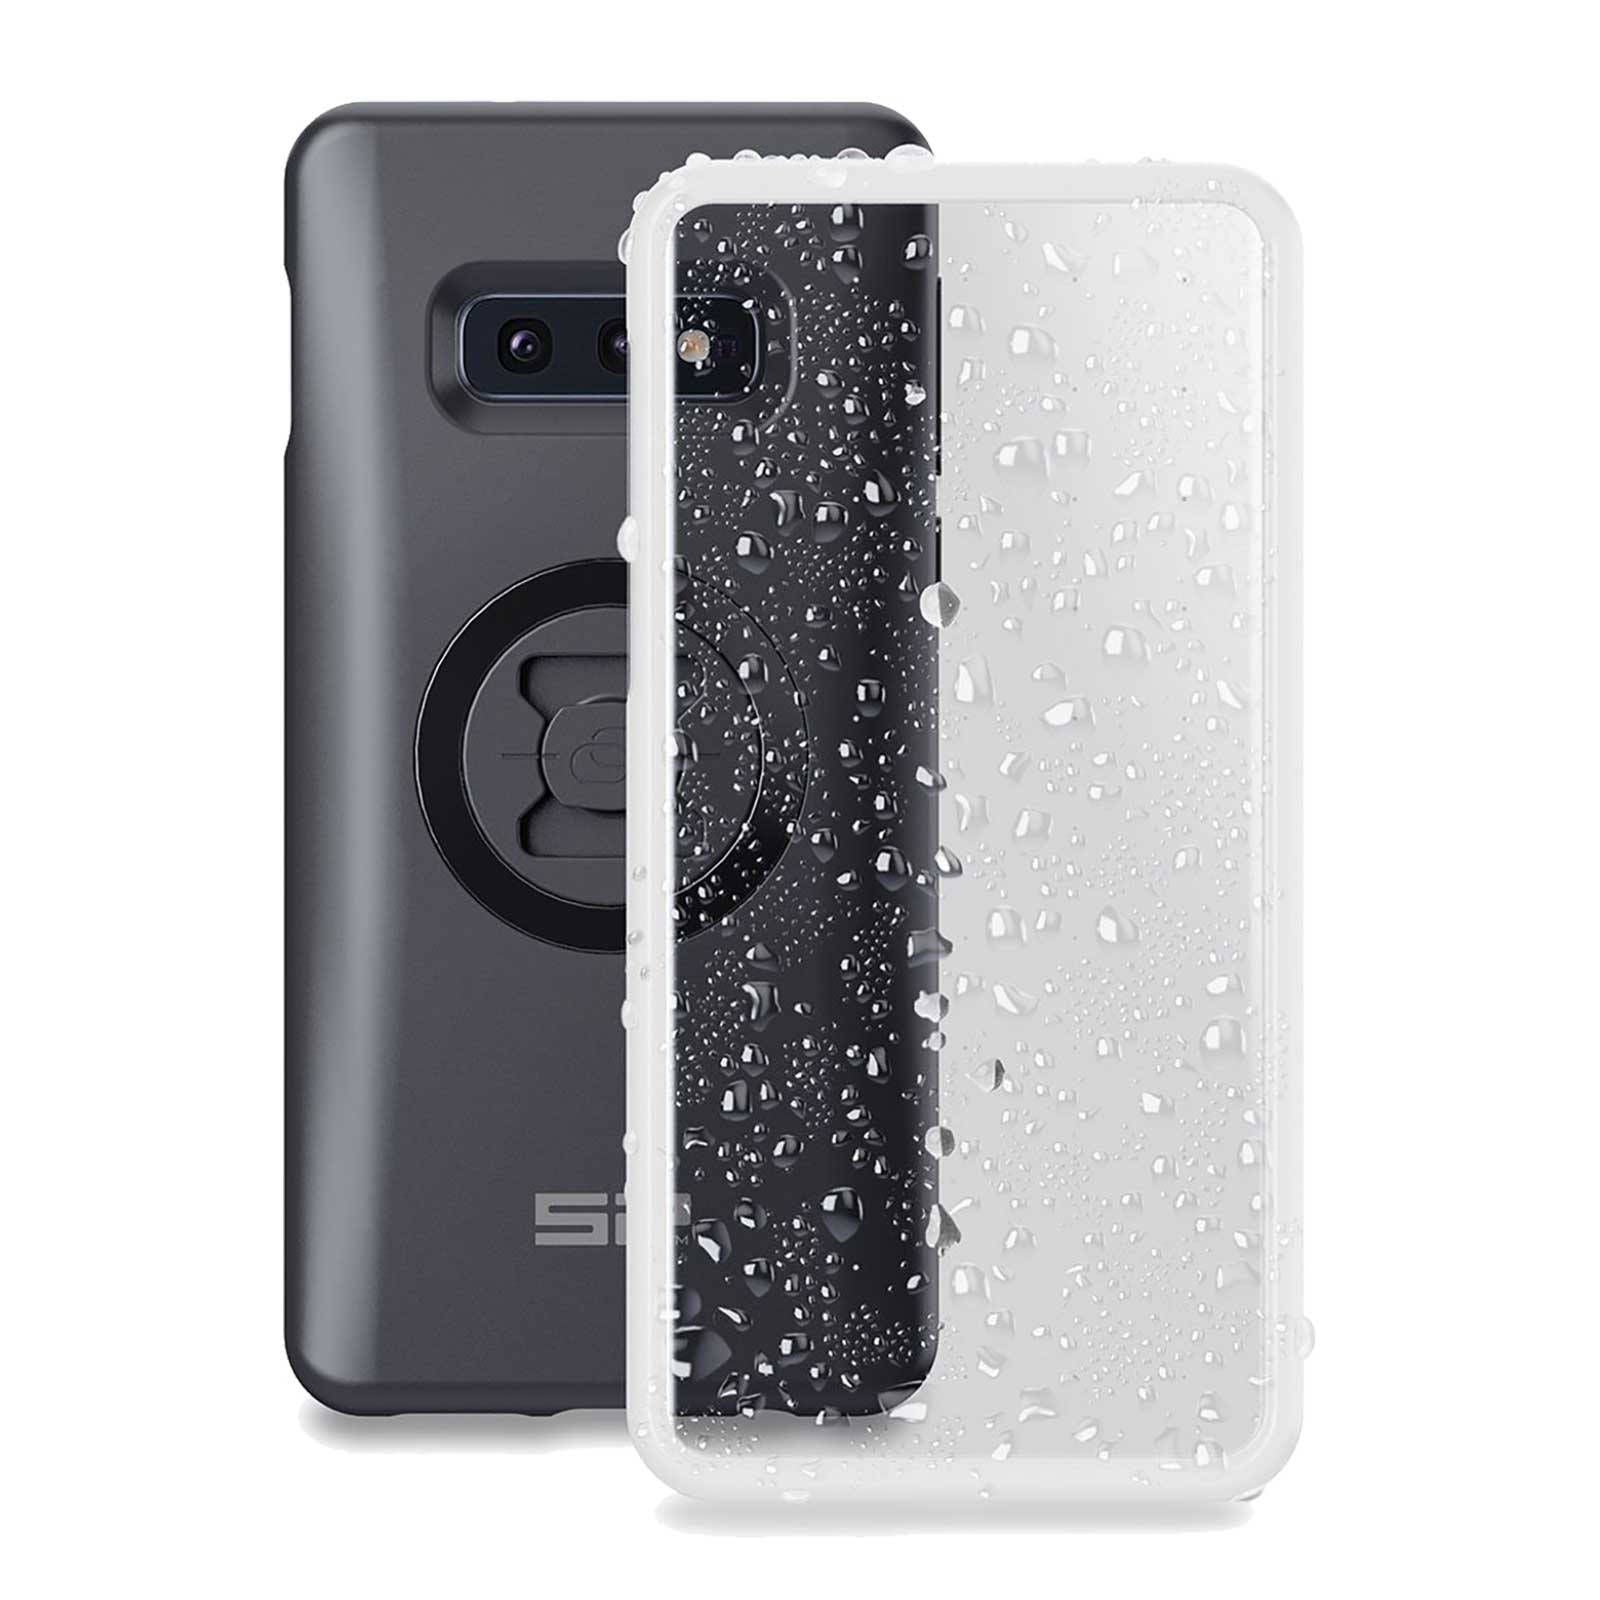 New SP CONNECT WEATHER COVER SAMSUNG GALAXY S10E SPC55220